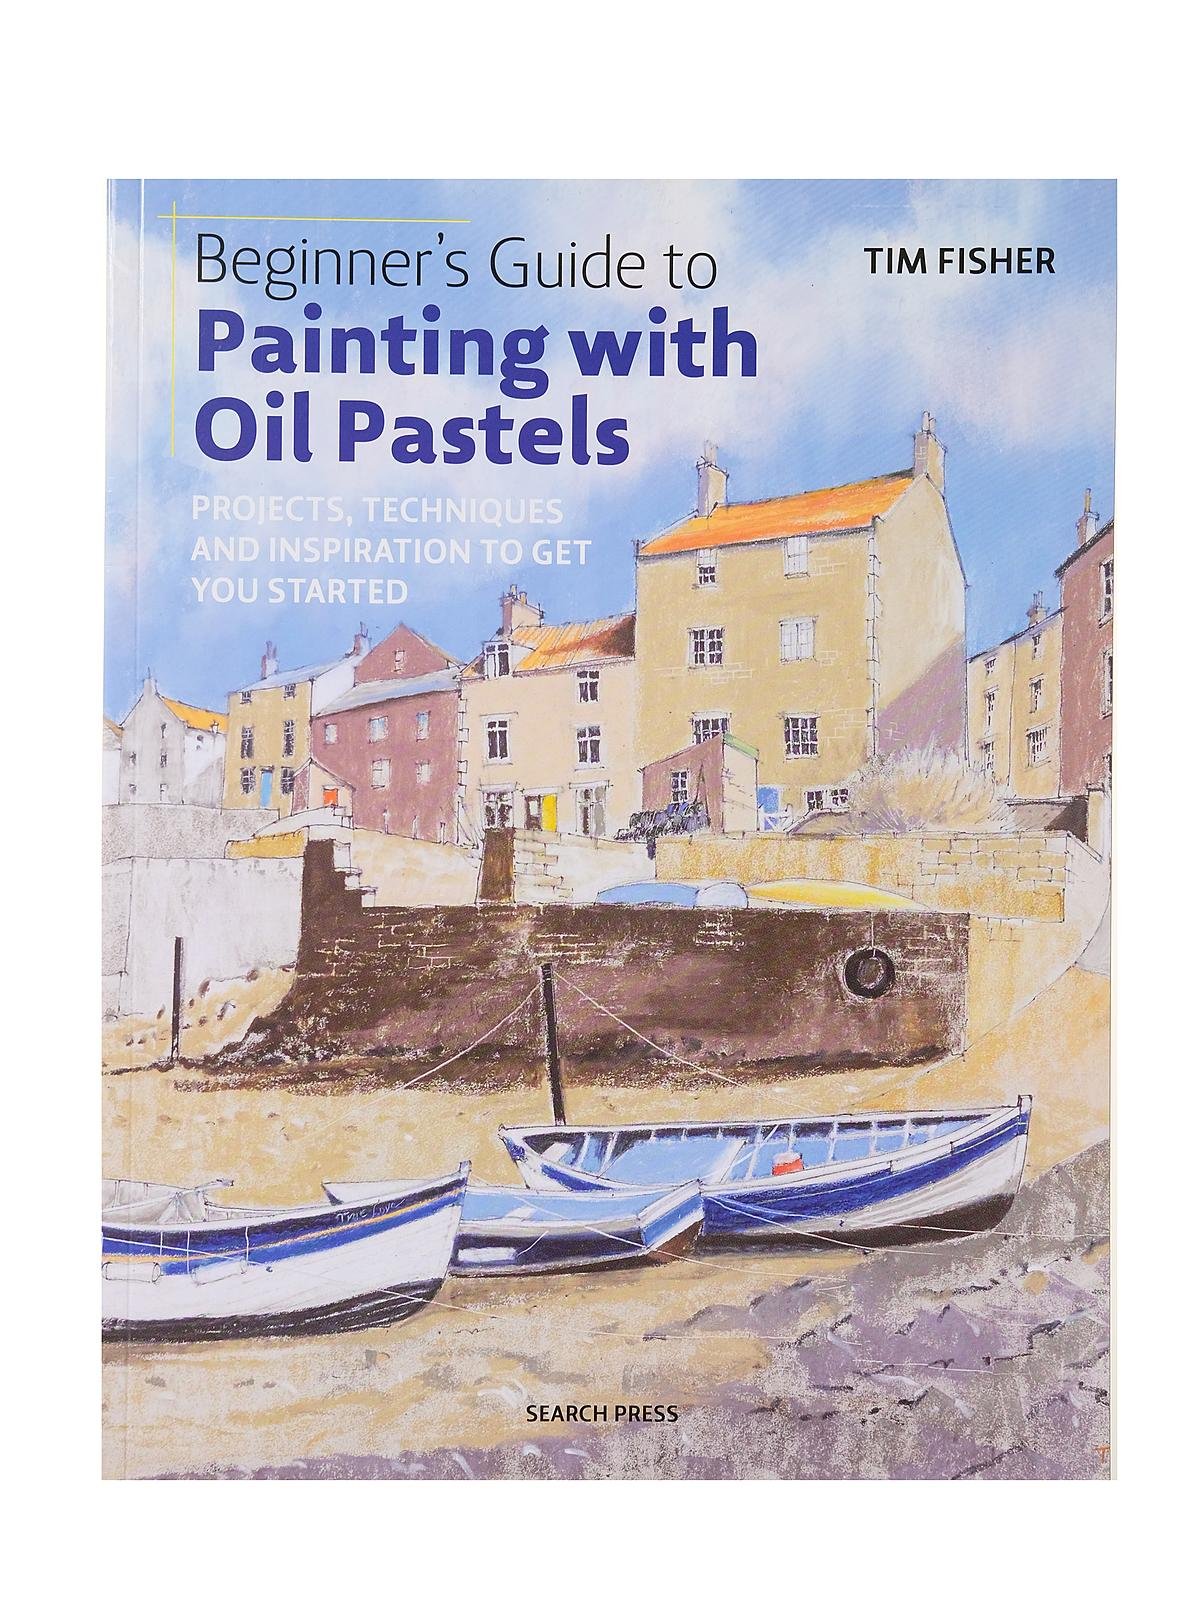 Oil painting - how to get started a beginners guide